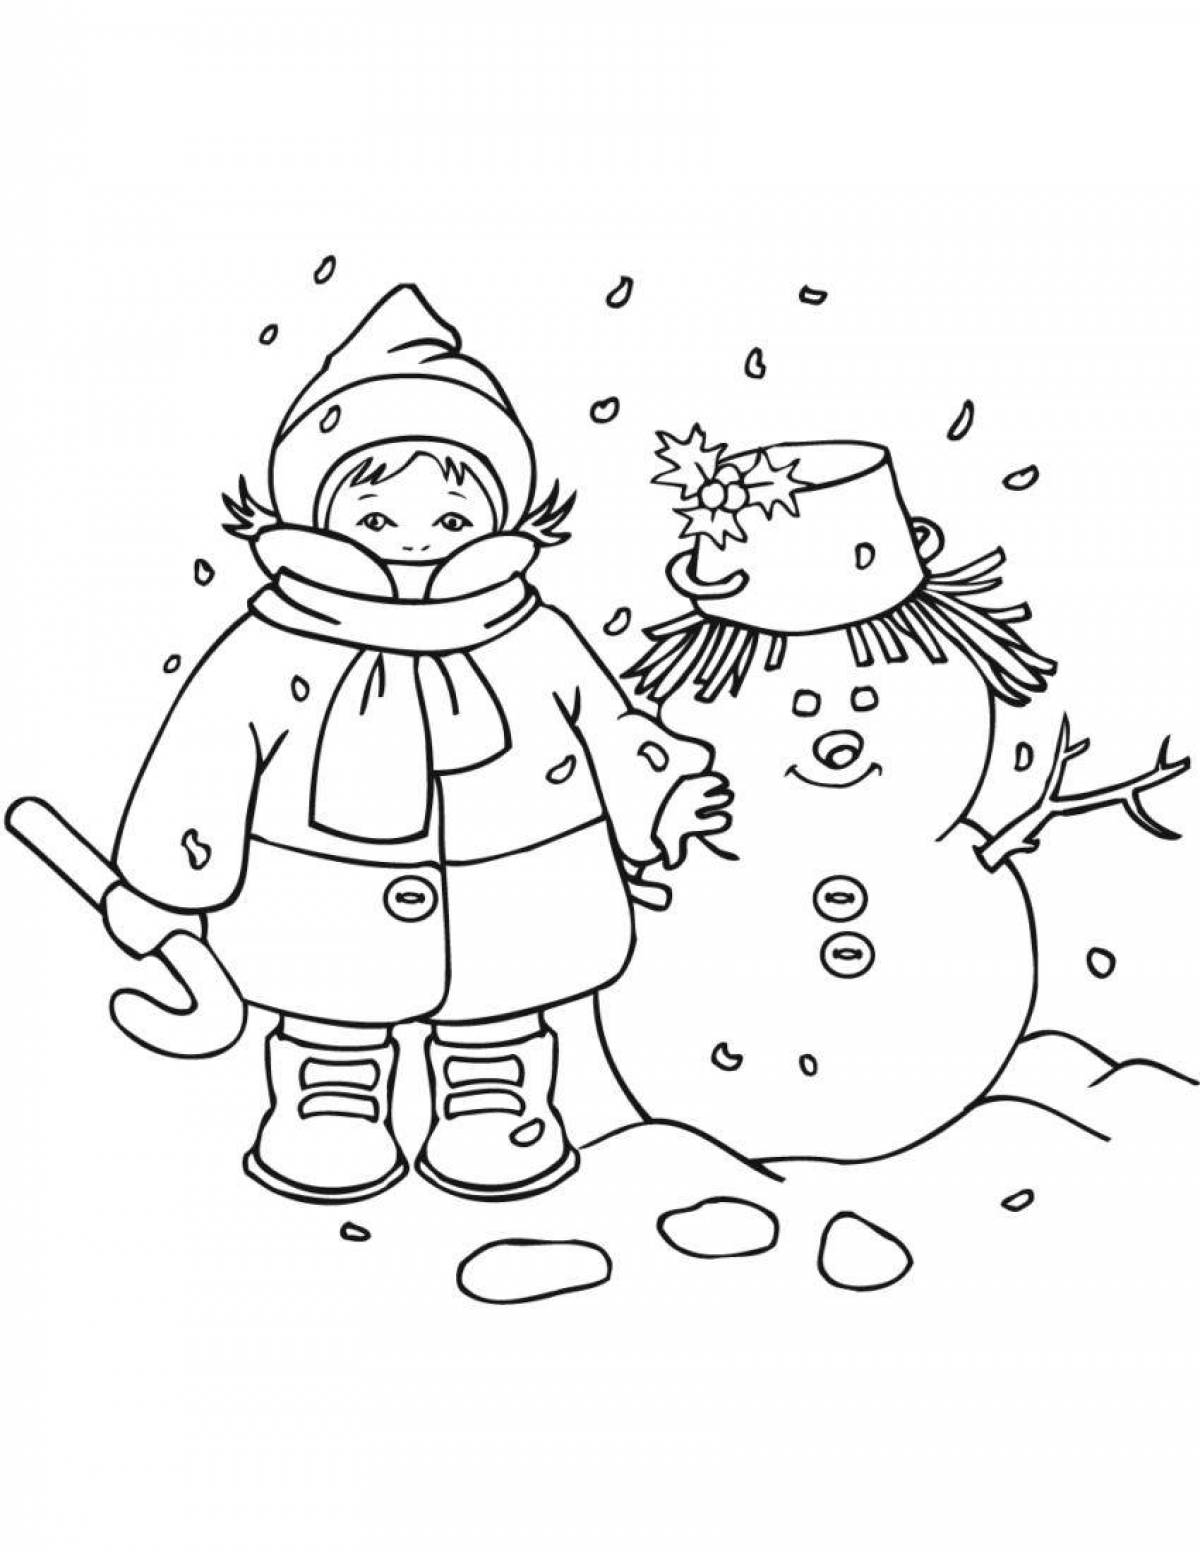 Gorgeous winter day coloring for kids